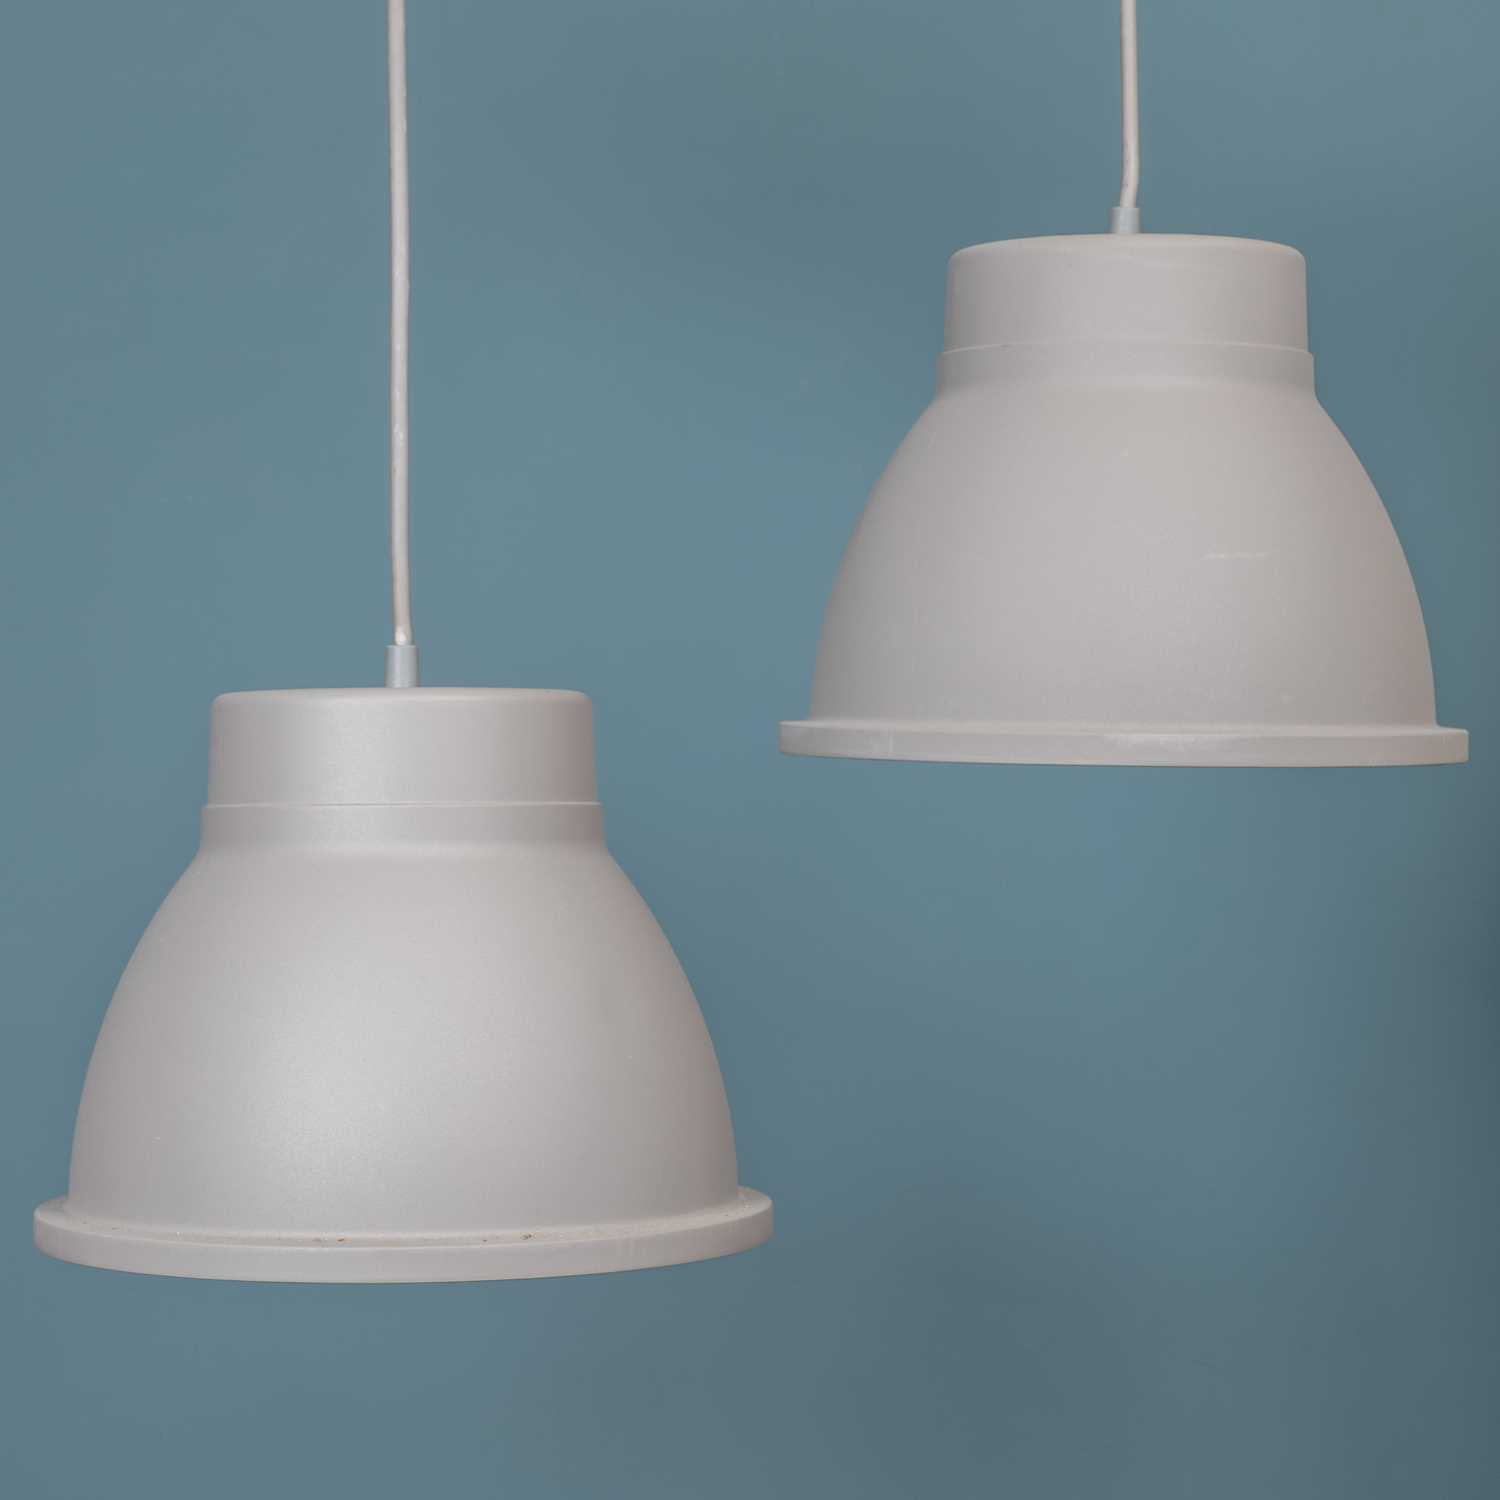 Lot 67 - A pair of "film studio" pendant lamps designed by Thomas Barnstrand for Muuto